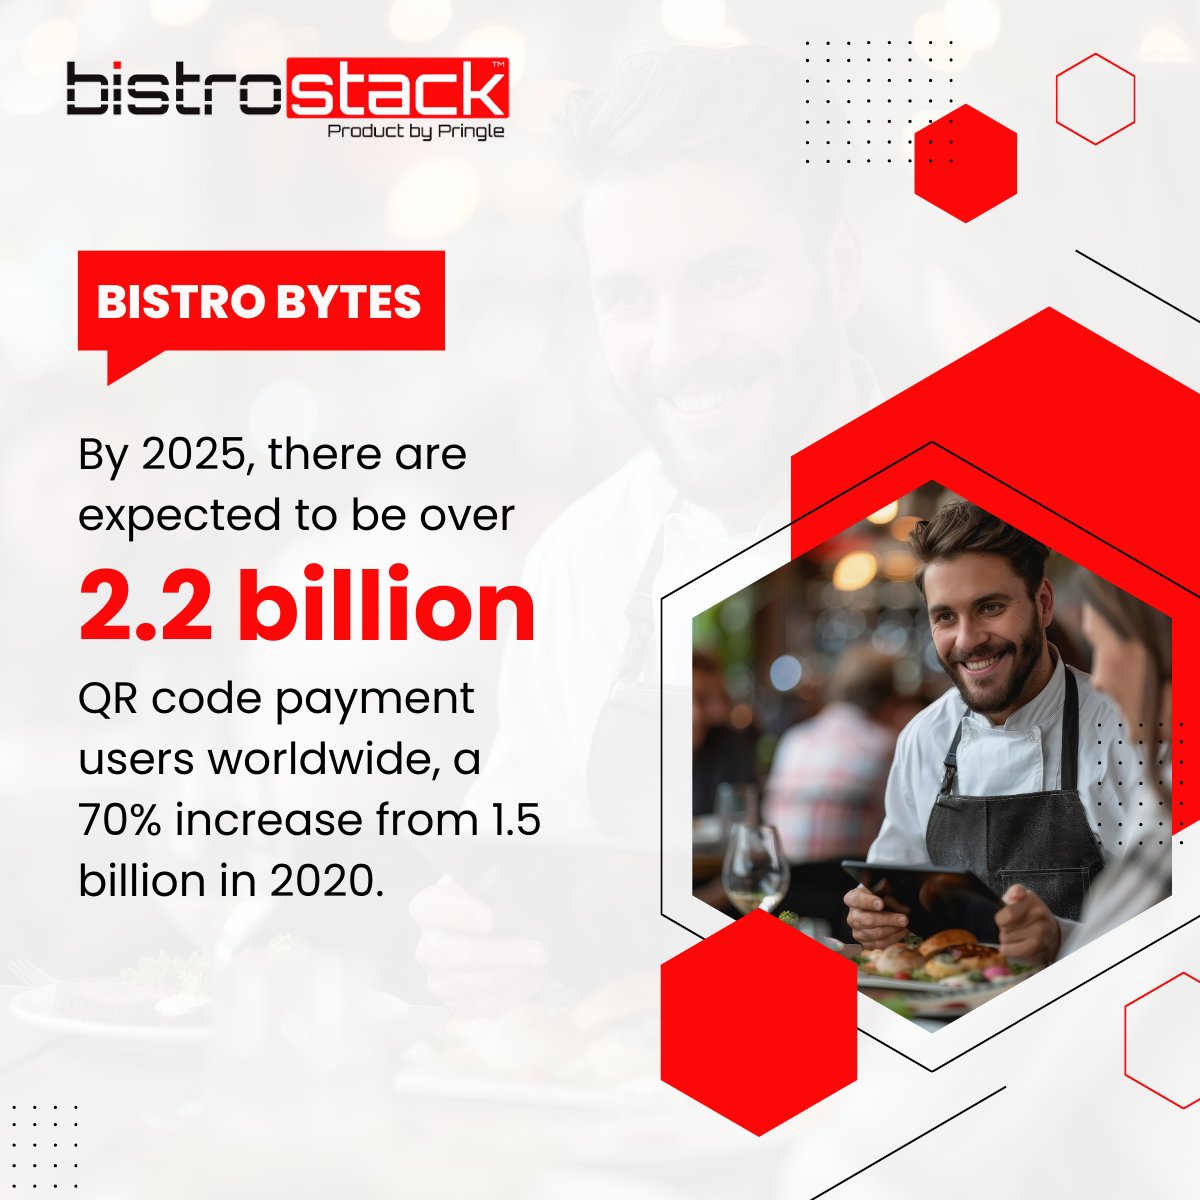 Get ready to scan!  By 2025, over 2.2 BILLION people will be using QR codes for payments - that's a 70% jump in just 5 years!  Is your business ready for the future of cashless transactions?  

#RestaurantTech #BistroStack #QRCodePayments  #RestaurantTrends #BistroBytes